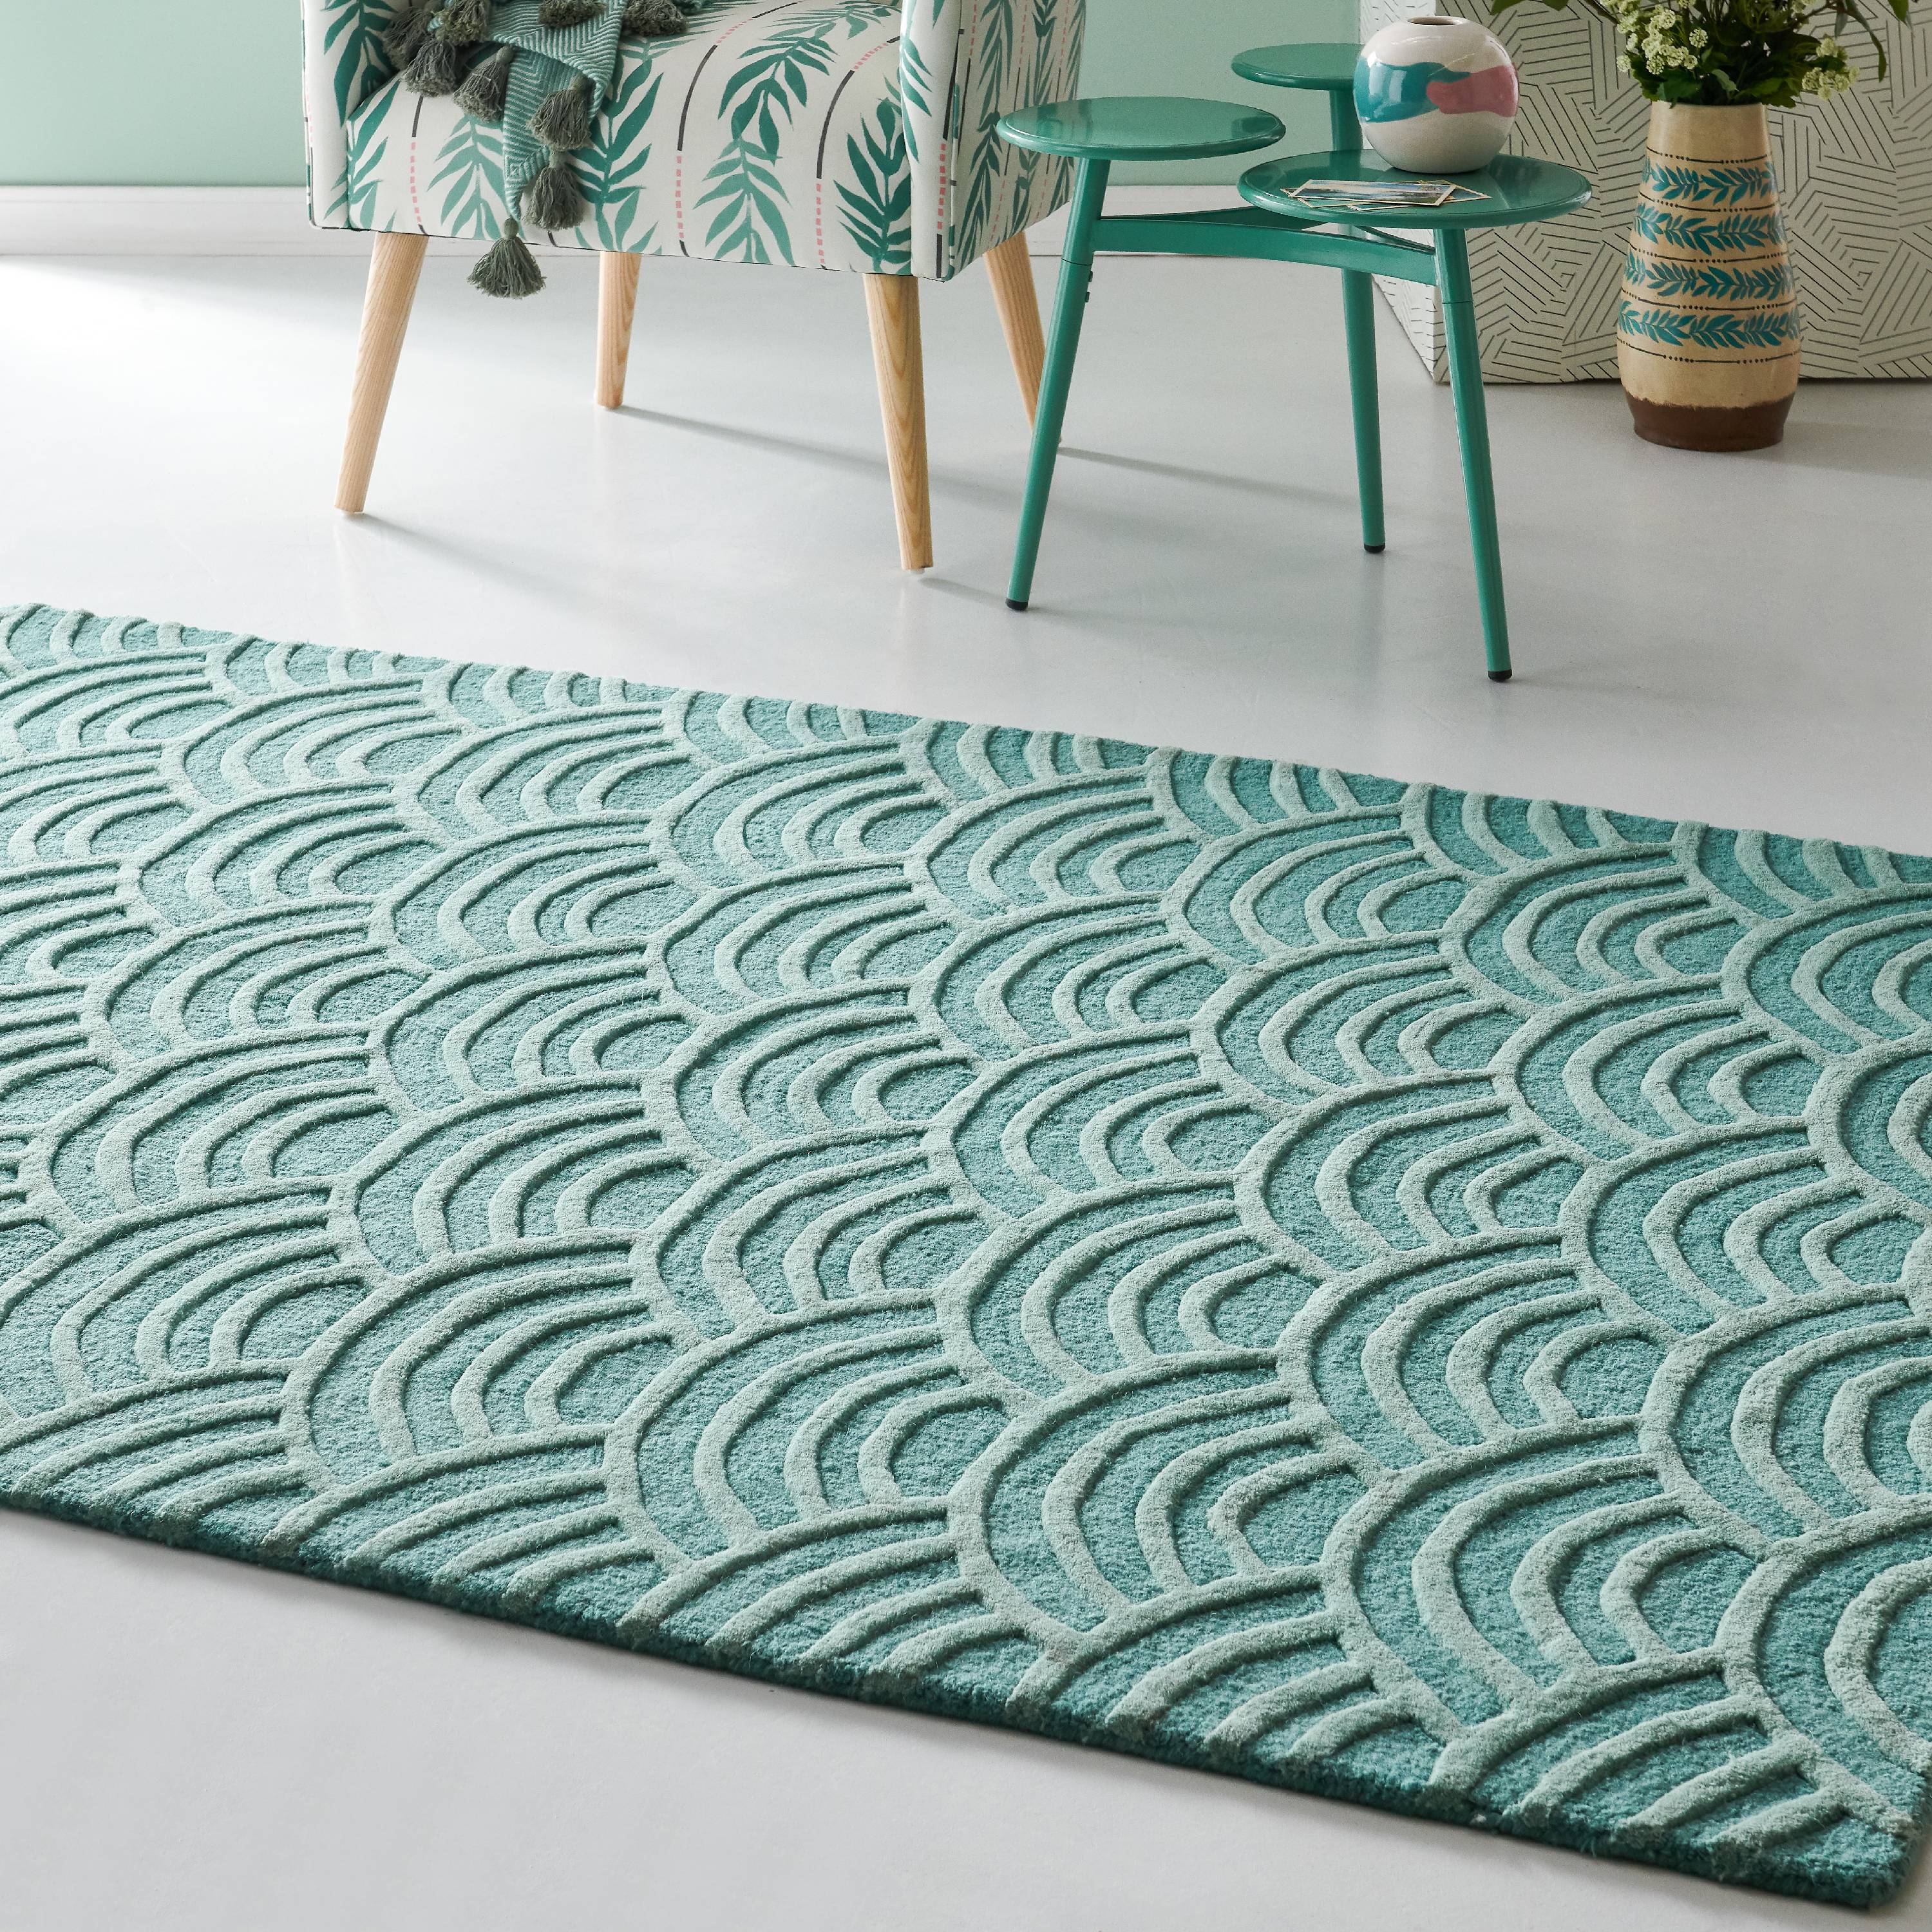 Vintage Sun Area Rug by Drew Barrymore Flower Home - image 5 of 5